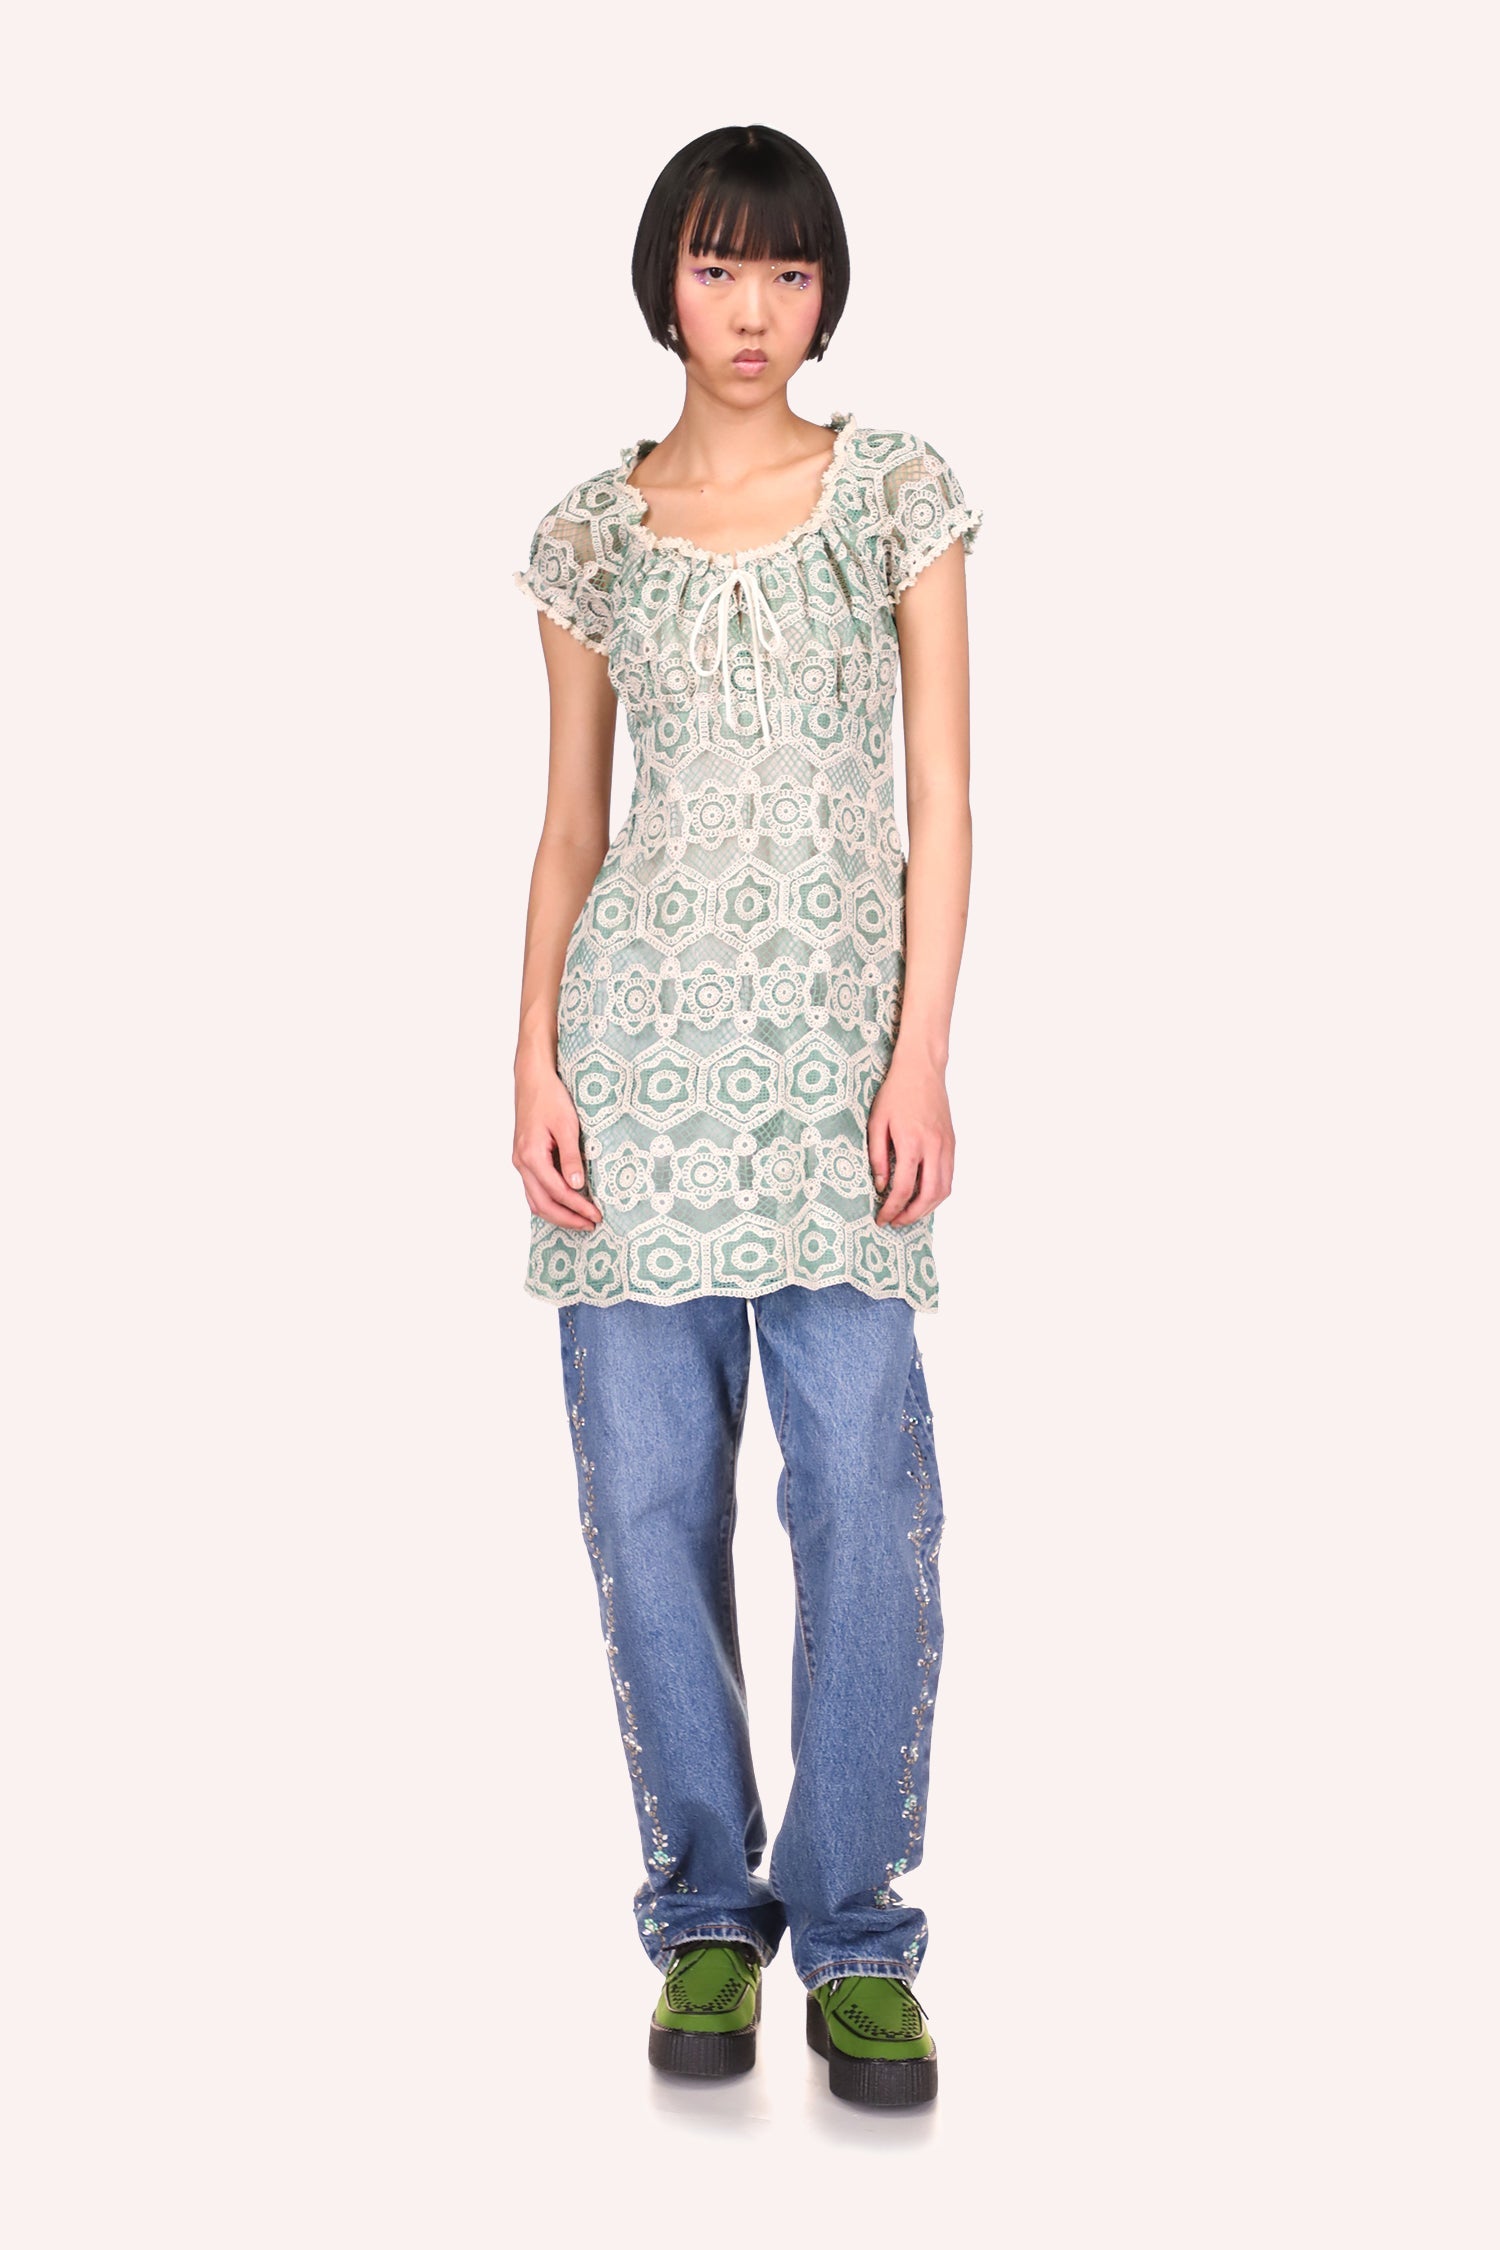 Anna Sui Floral Lace Tie Dress Sage, under hips long, short sleeves over shoulders, round cut collar